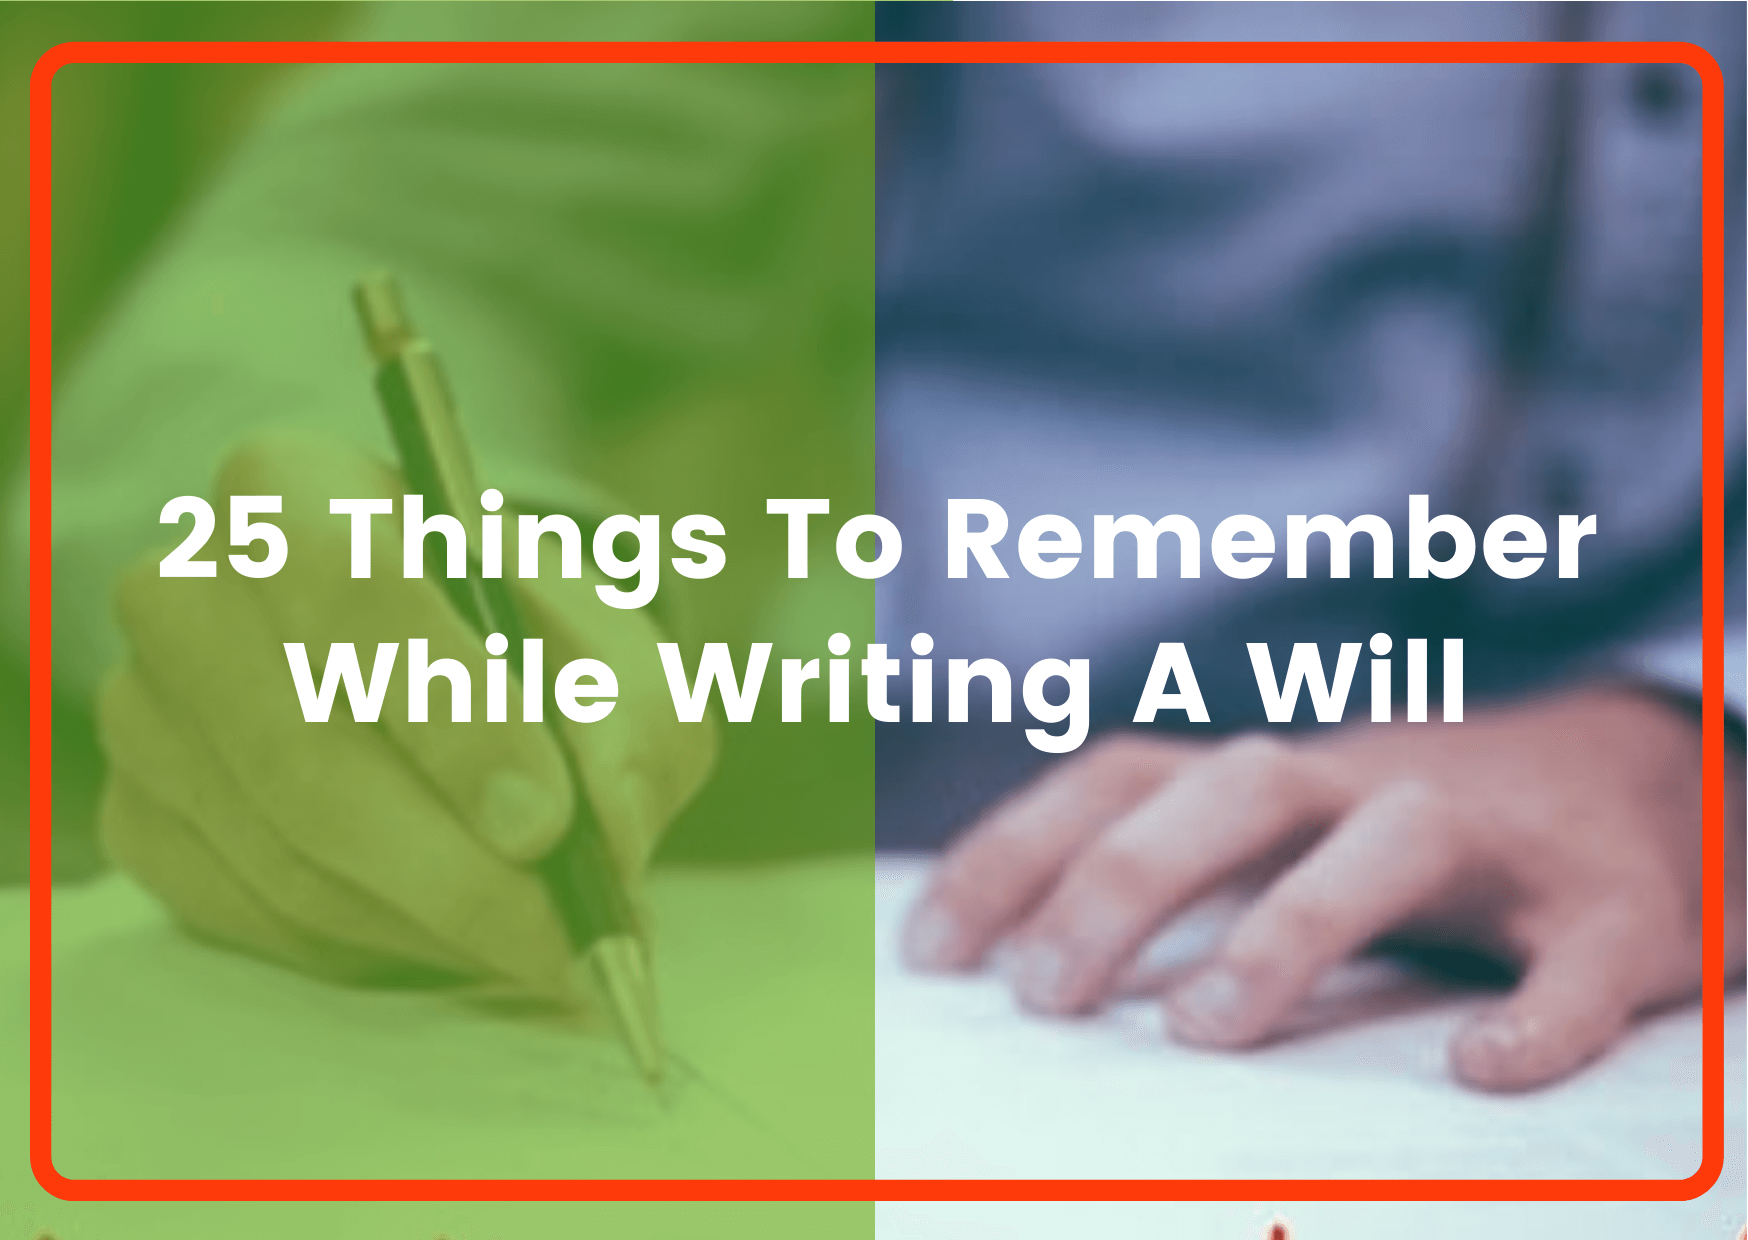 25-things-to-remember-while-writing-a-will-save-more-money